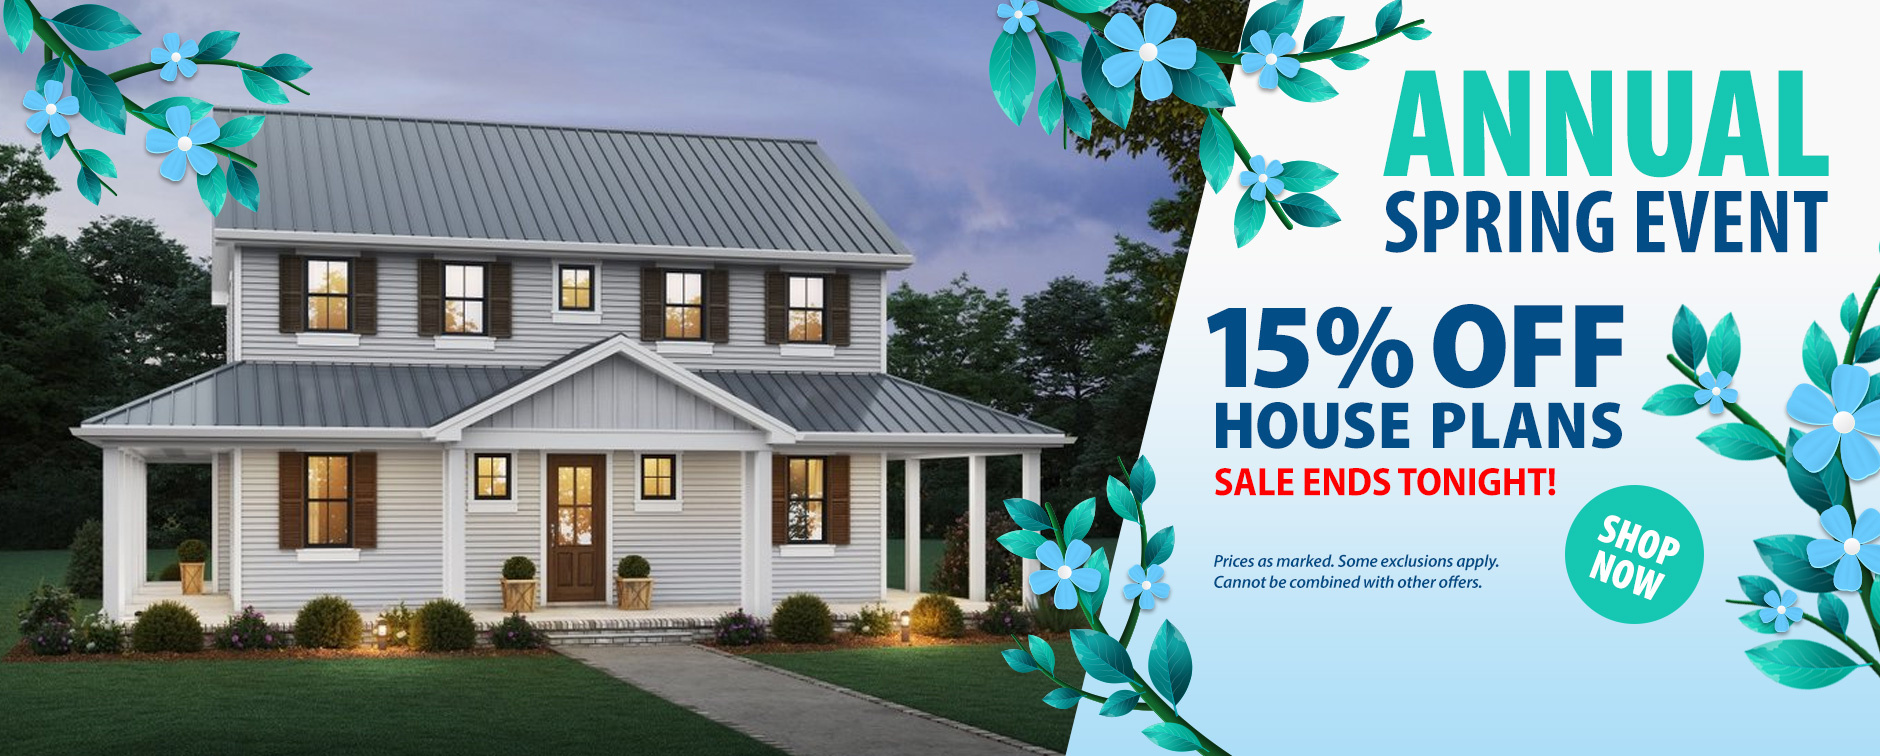 Enjoy 15% Off Thousands of House Plans. Sale Ends Tonight.